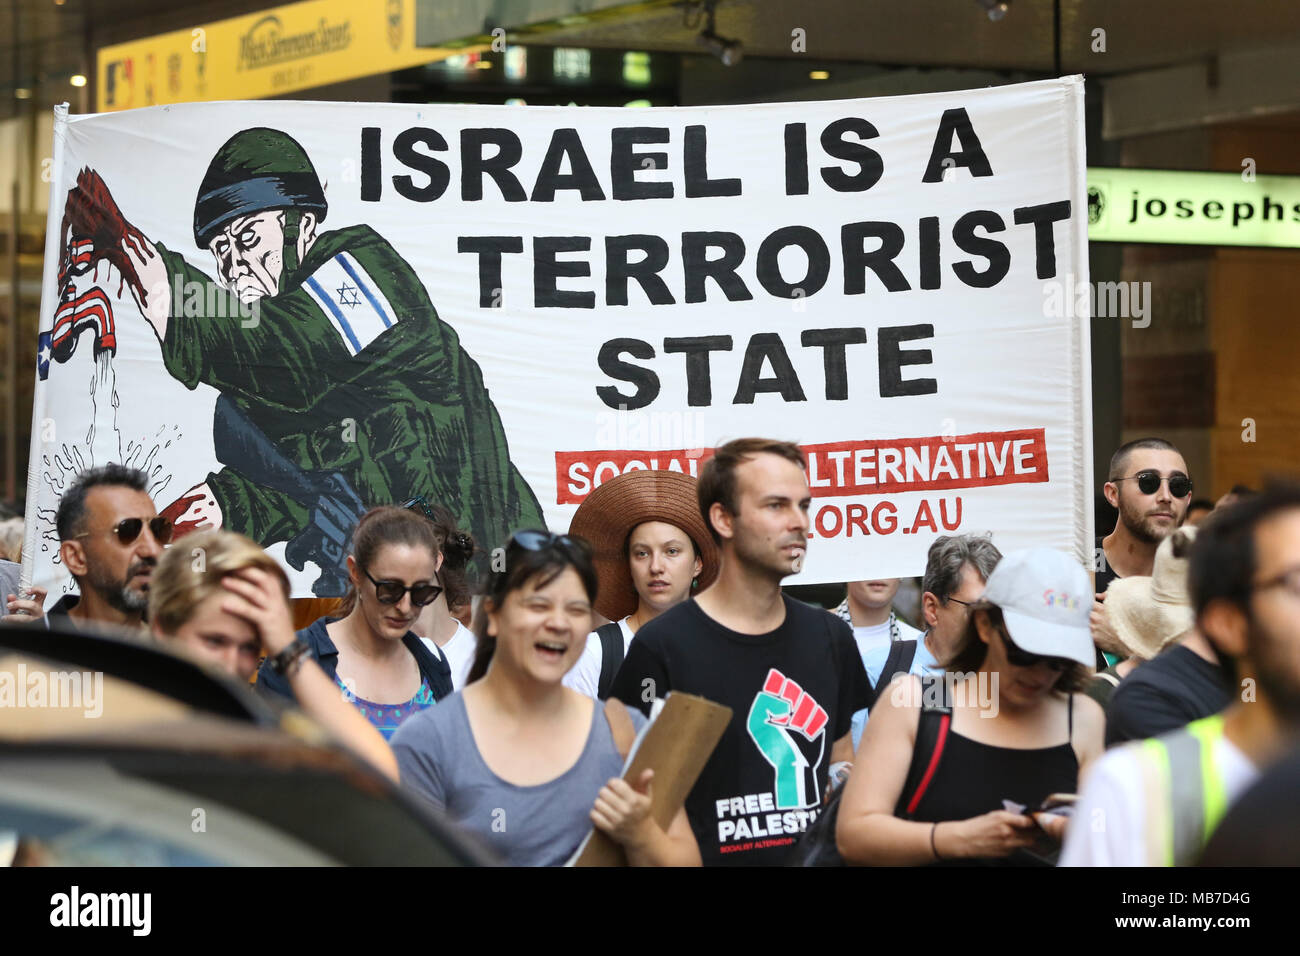 Sydney Australia 8th April 2018 Palestine Action Group Sydney Held A Rally From 1pm At Sydney Town Hall Followed By A March Via Pitt Street Mall To The Us Consulate And Returning